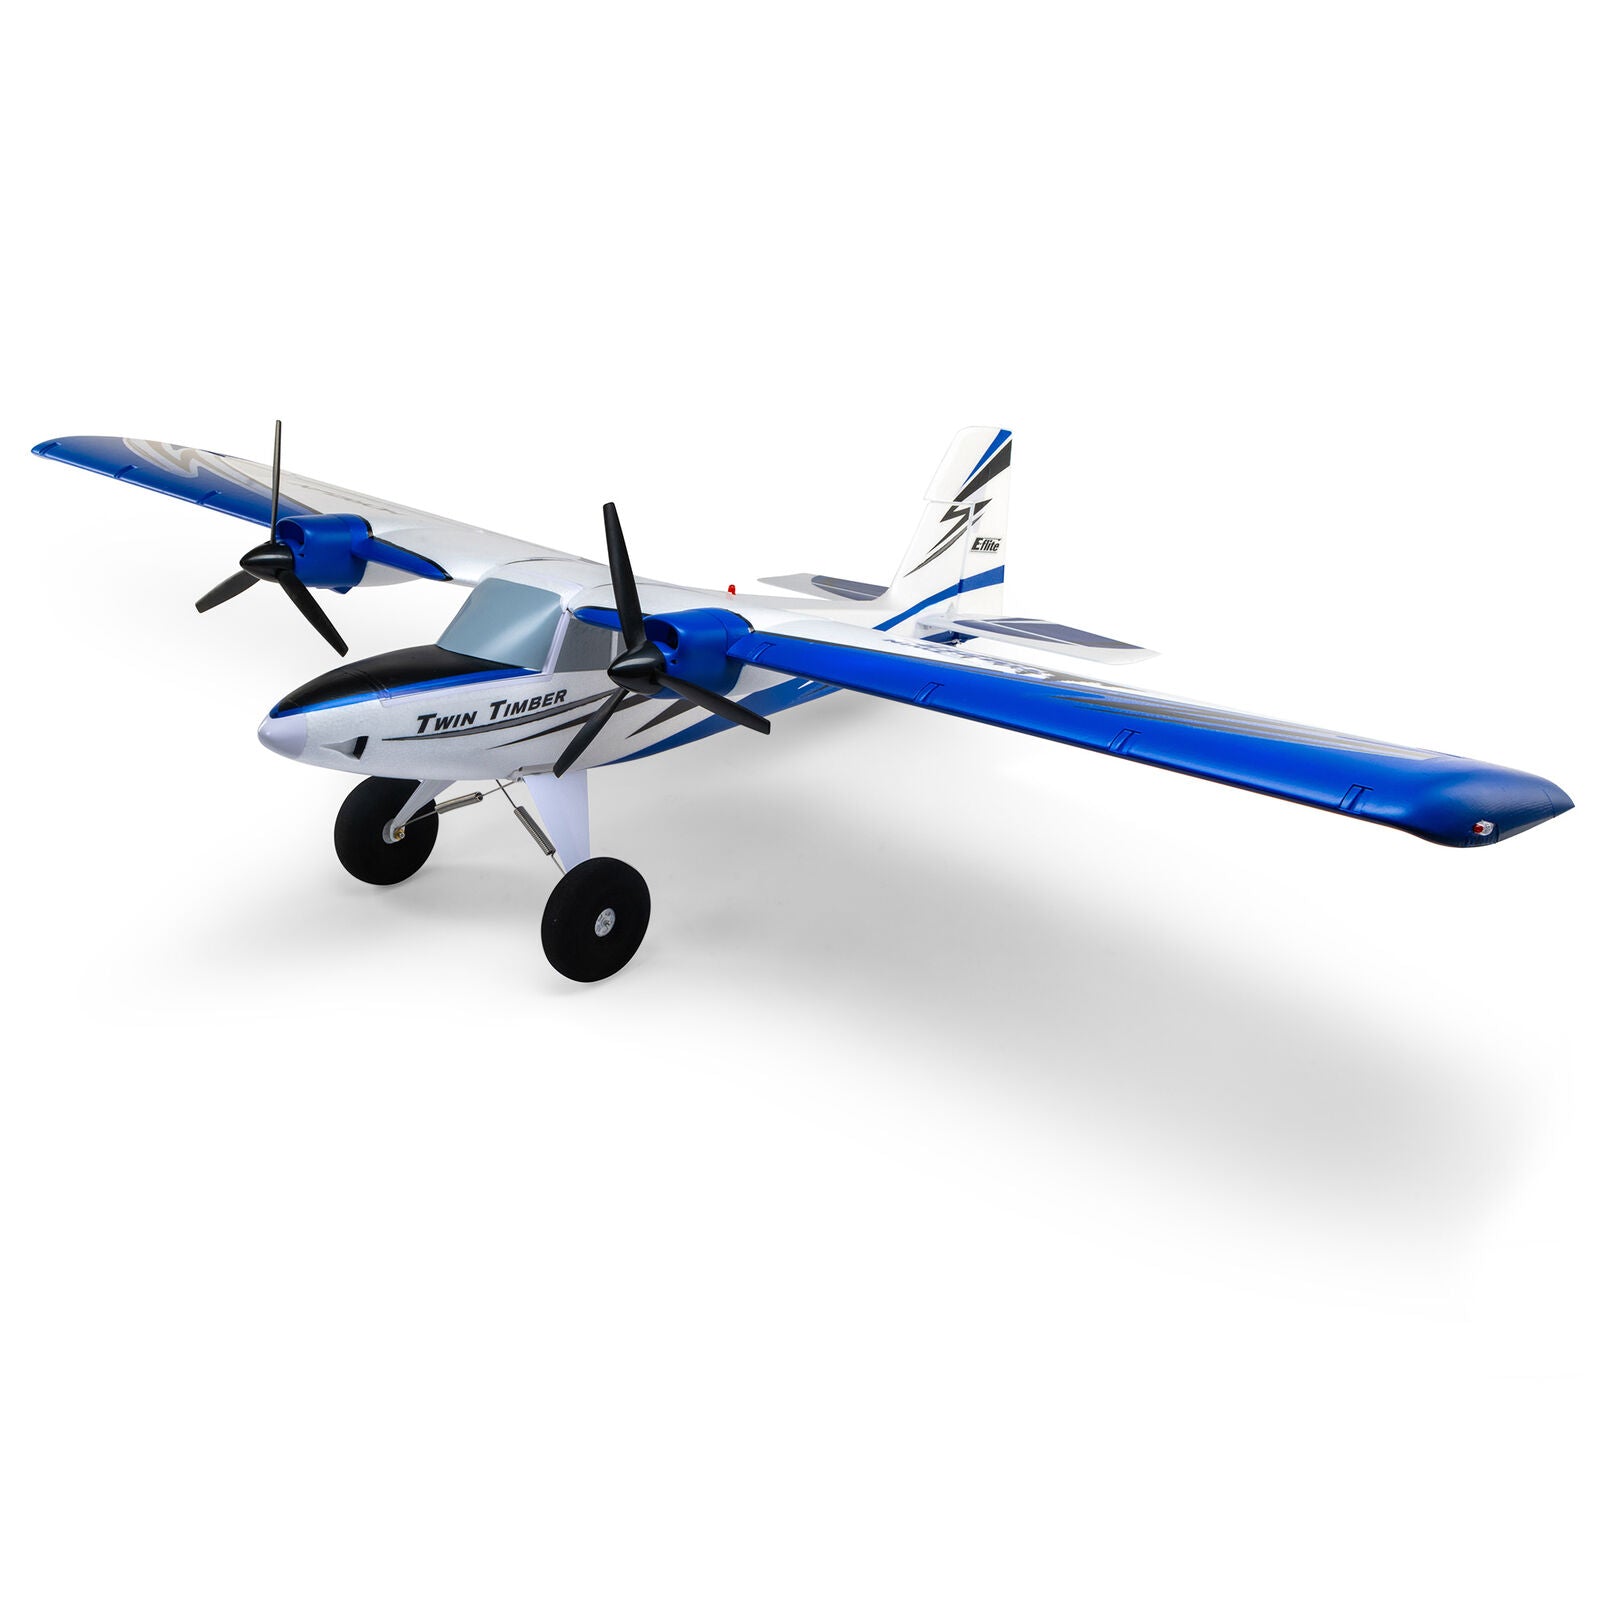 EFLITE EFL23850 Twin Timber 1.6m BNF Basic with AS3X and SAFE Select